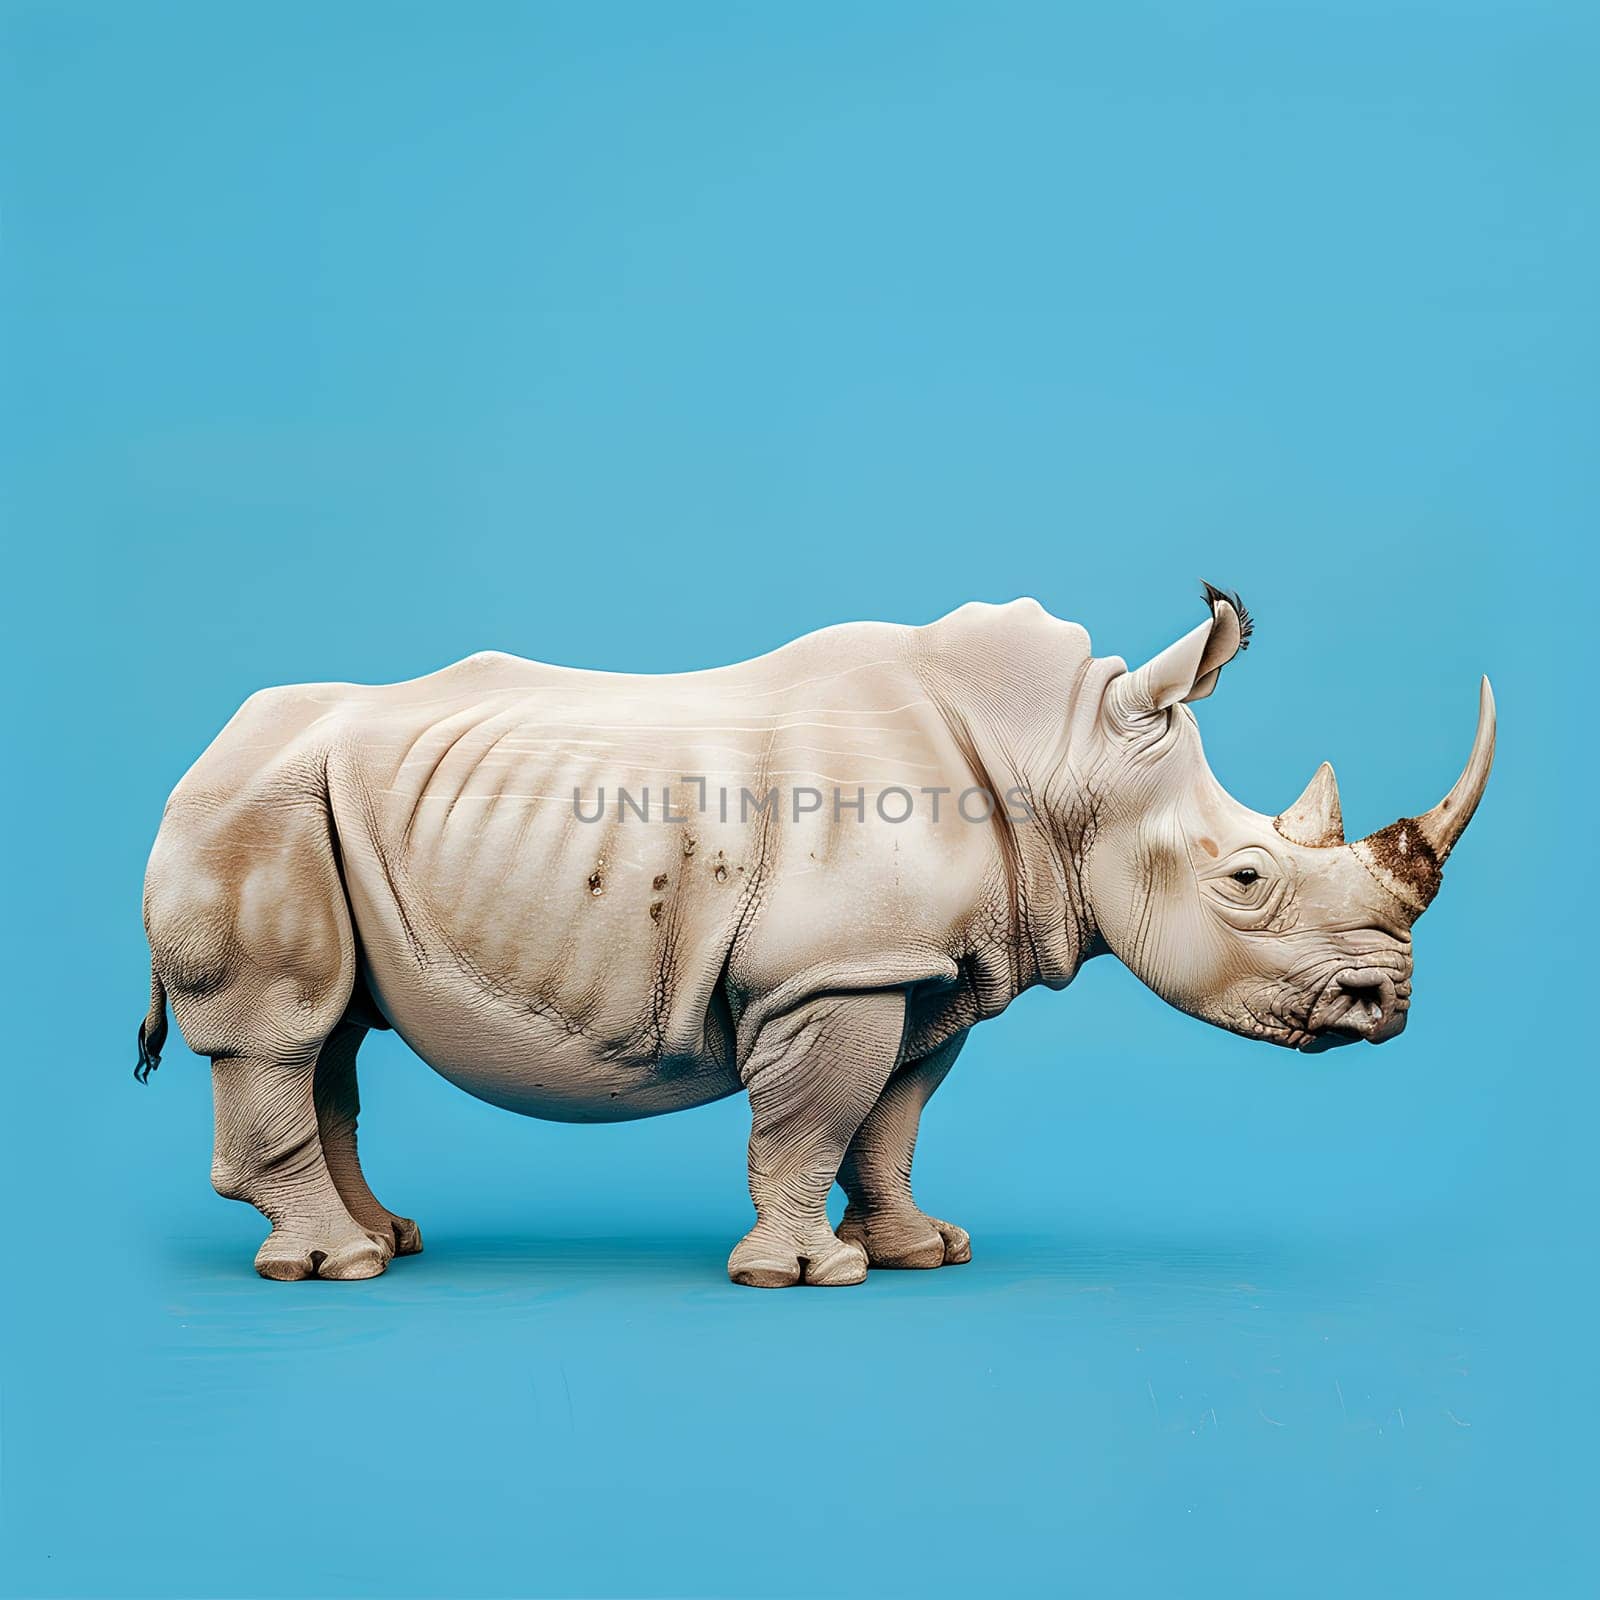 White rhino standing on blue background, a sculpture of a terrestrial animal by Nadtochiy